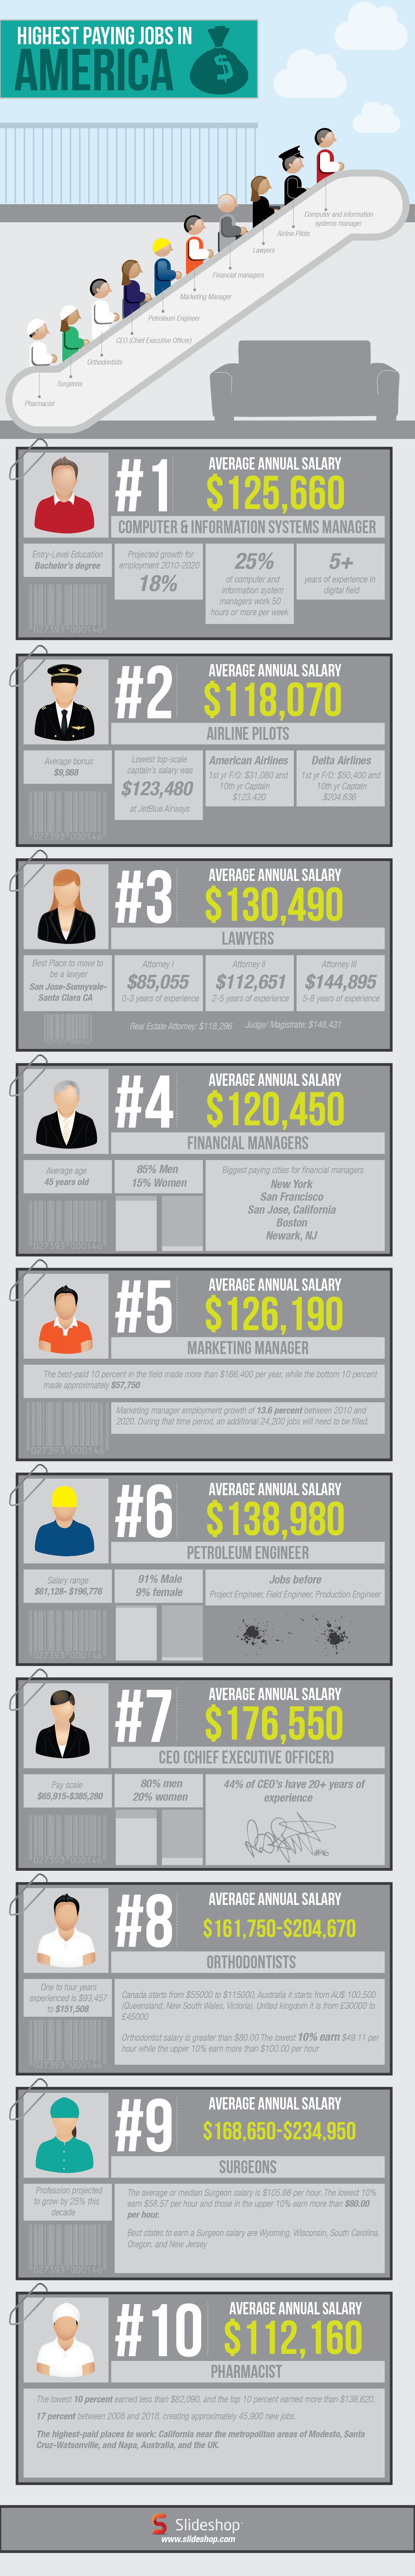 Top Highest Paying Jobs in America Ranking with Salary